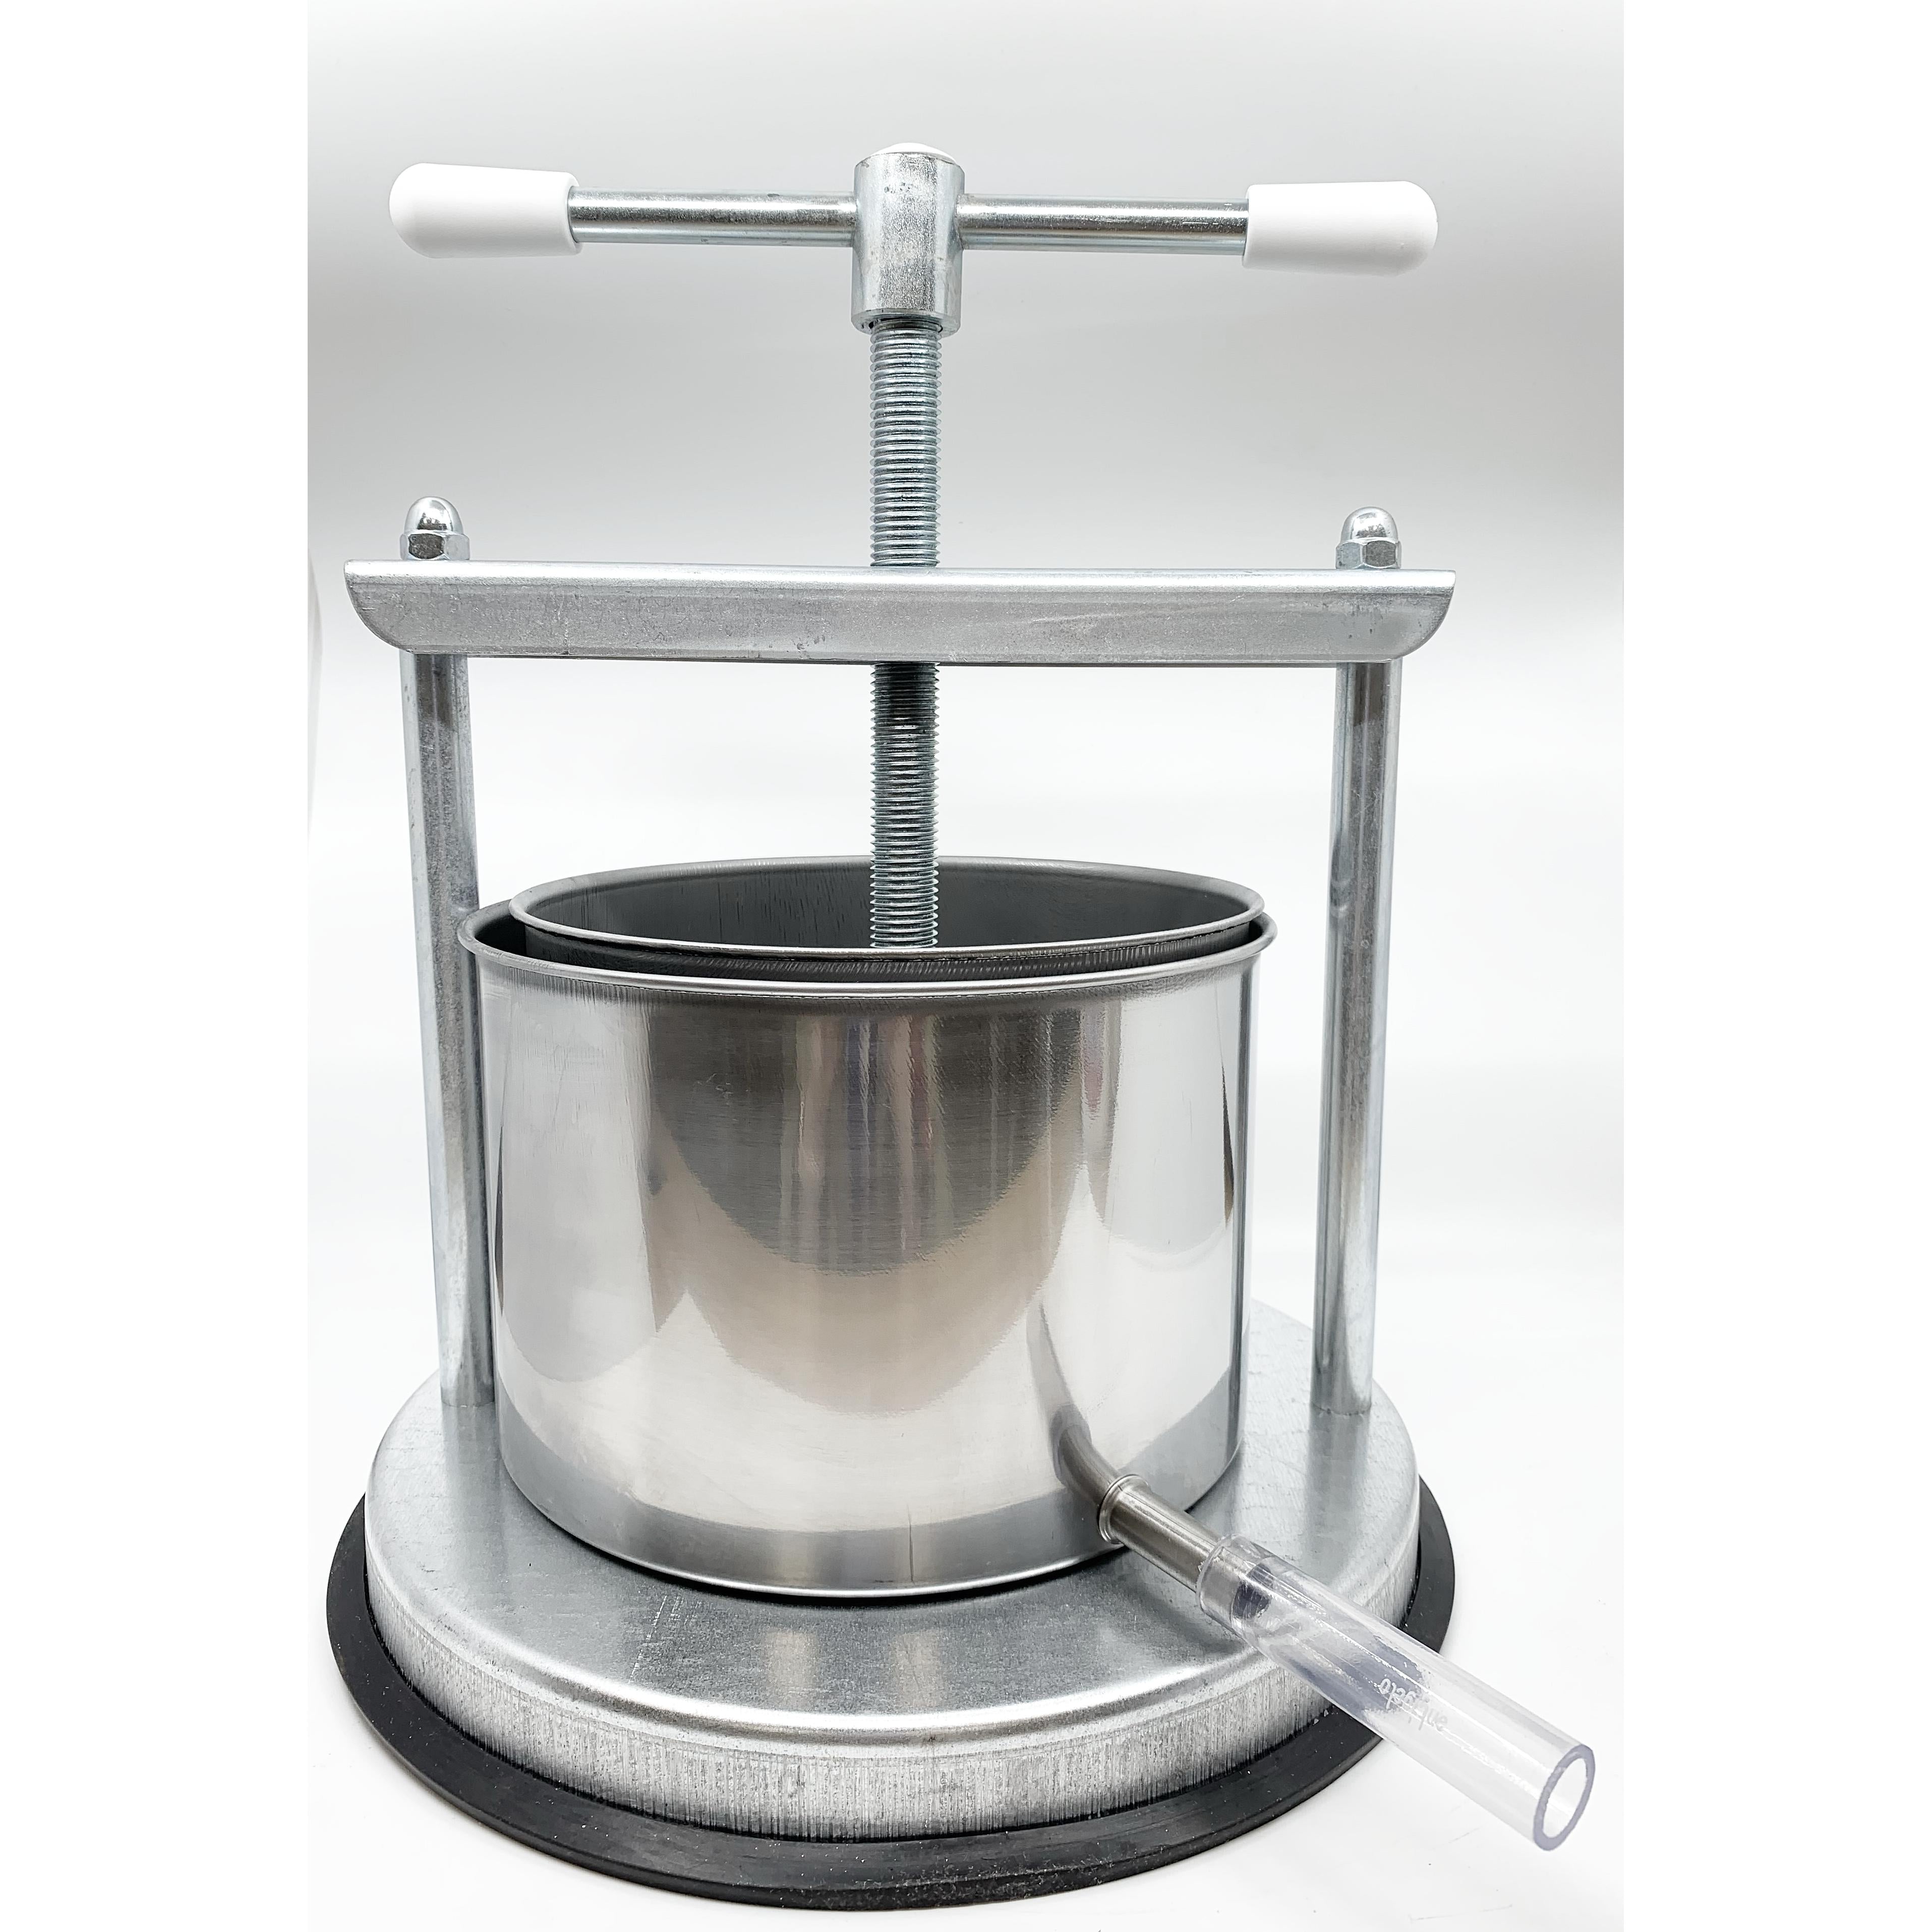 Large Professional Galvanized Vegetable / Fruit Press 8" - 5 Litre Torchietto - Made in Italy for Pressing Fruits, Vegetables, Berries and Tinctures With Spout